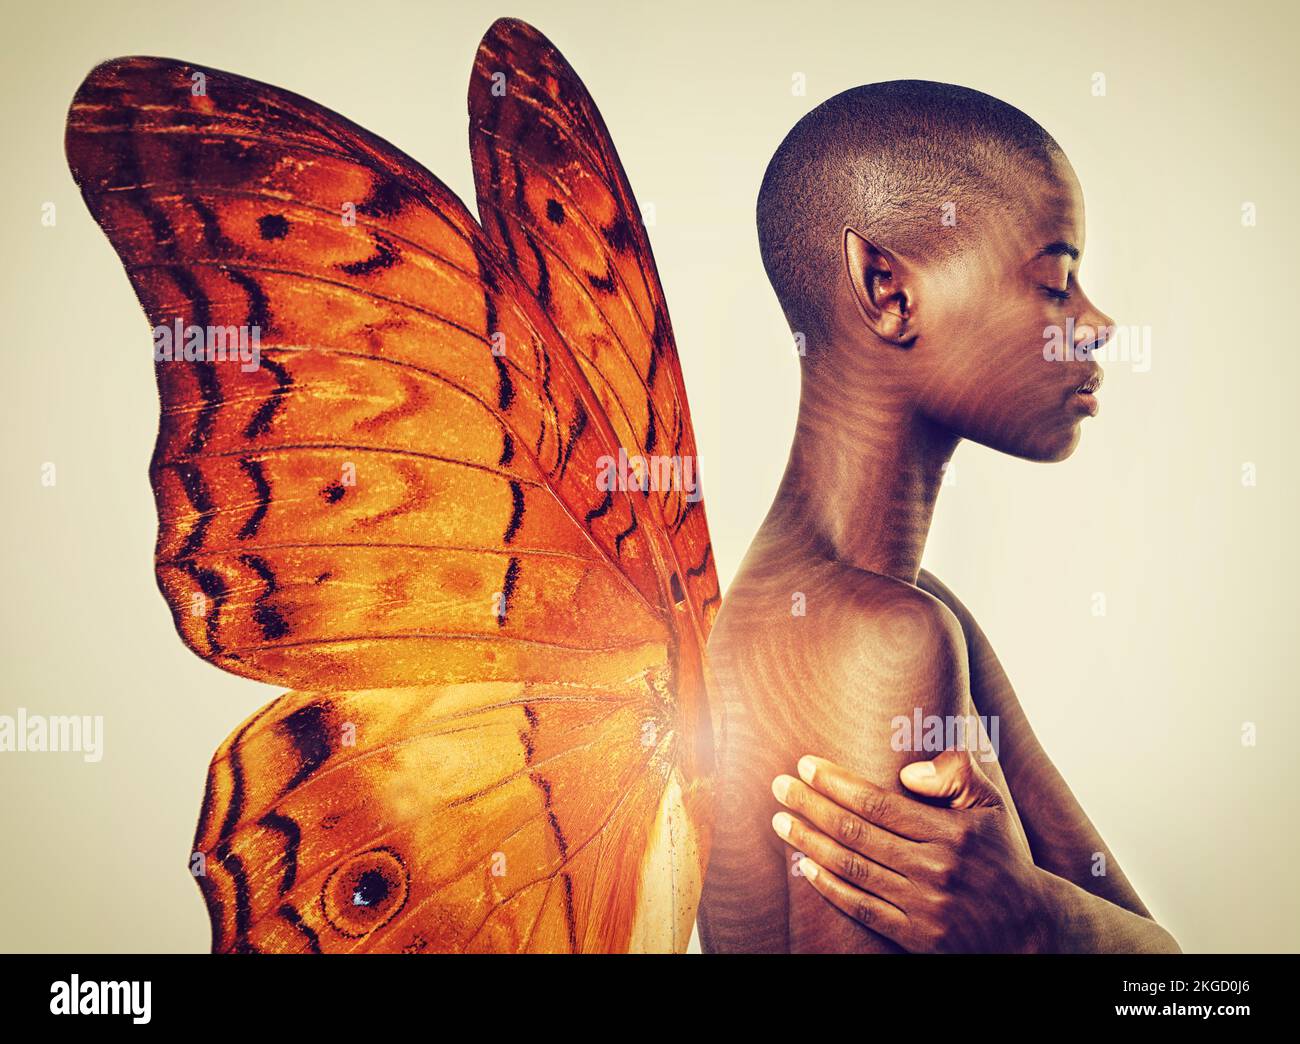 Theres magic in the natural world. a fairy of nature. Stock Photo